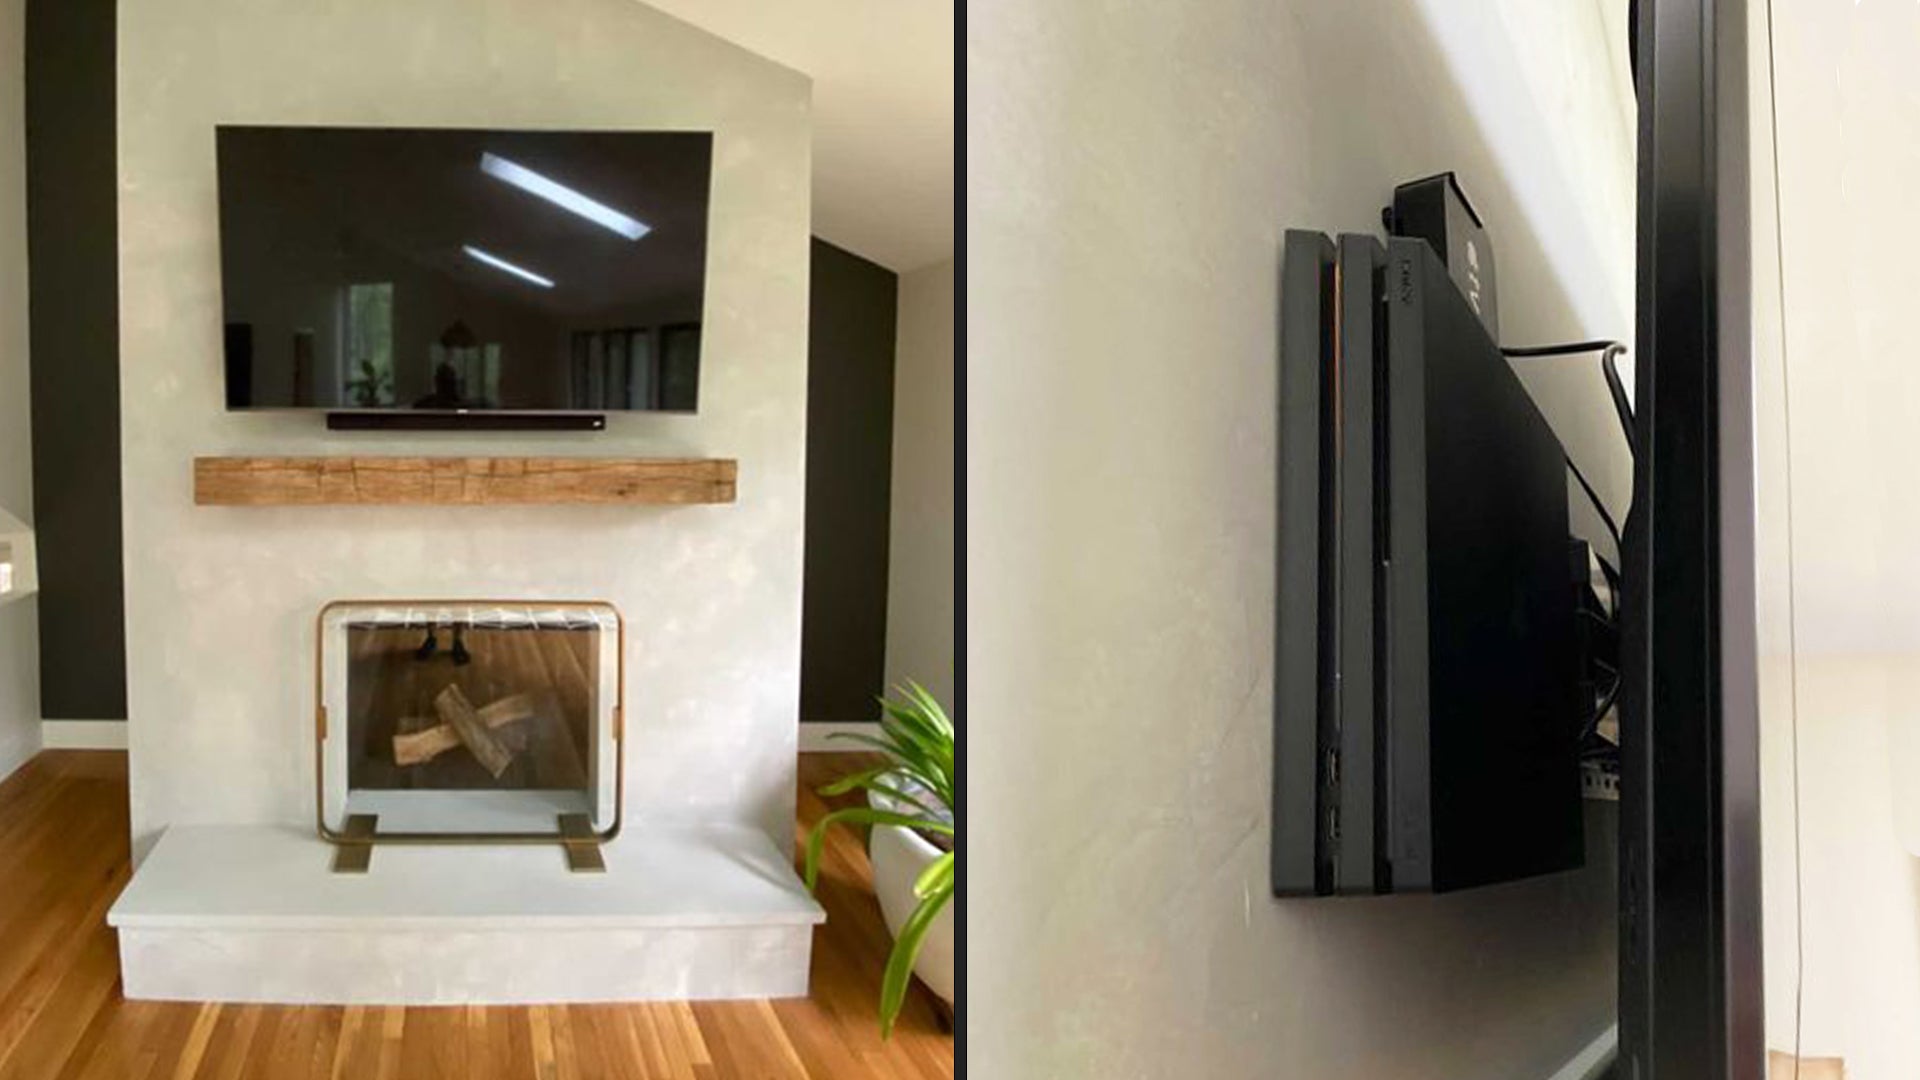 How To Hide Wires From A Wall Mount